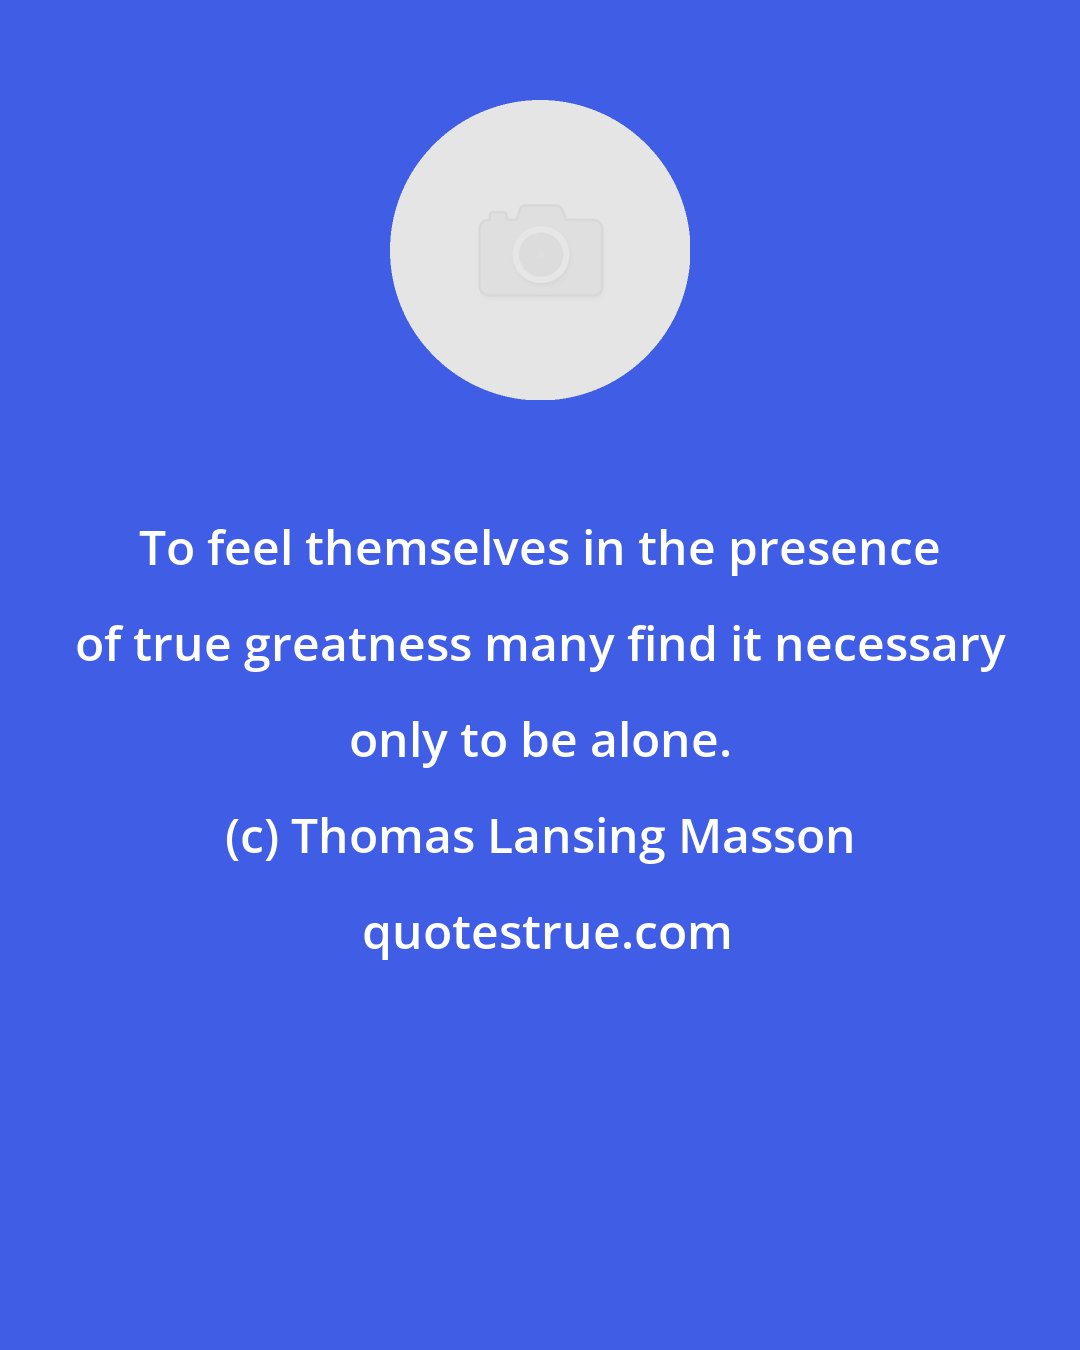 Thomas Lansing Masson: To feel themselves in the presence of true greatness many find it necessary only to be alone.